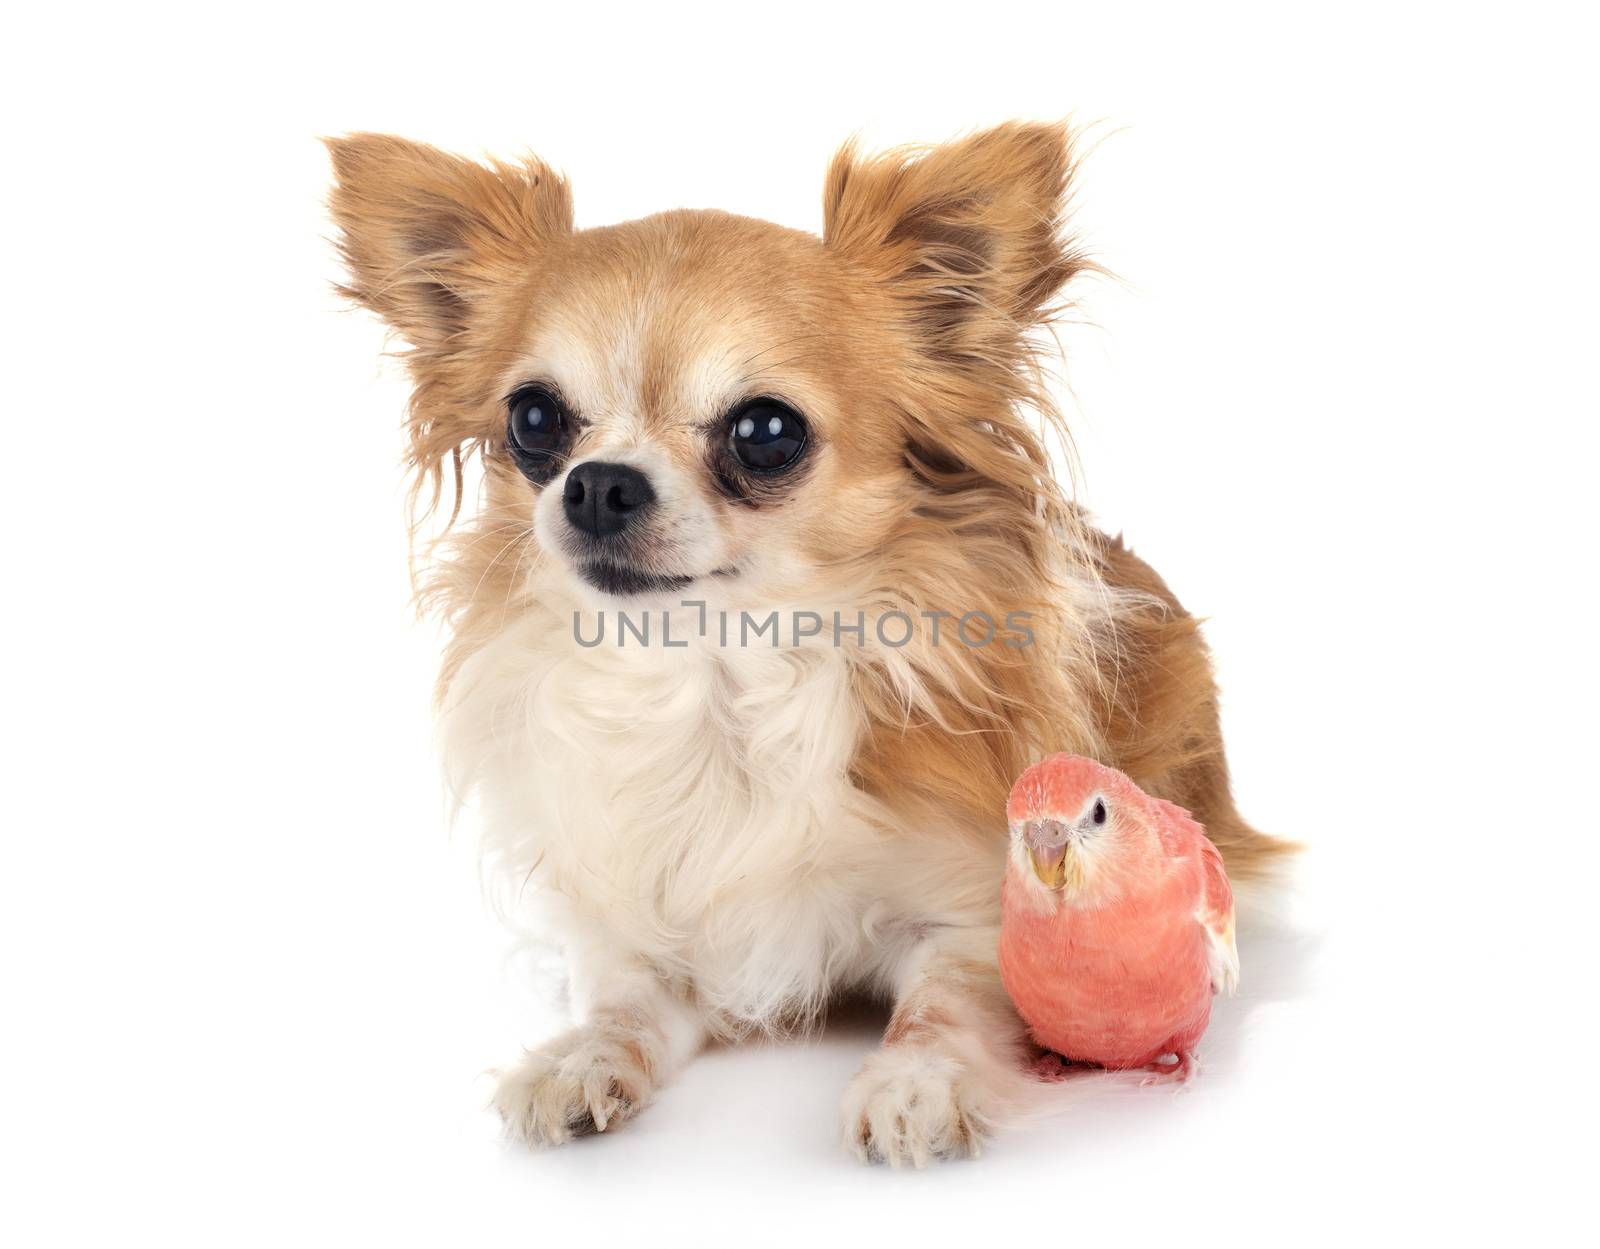 Bourke parrot and chihuahua in front of white background